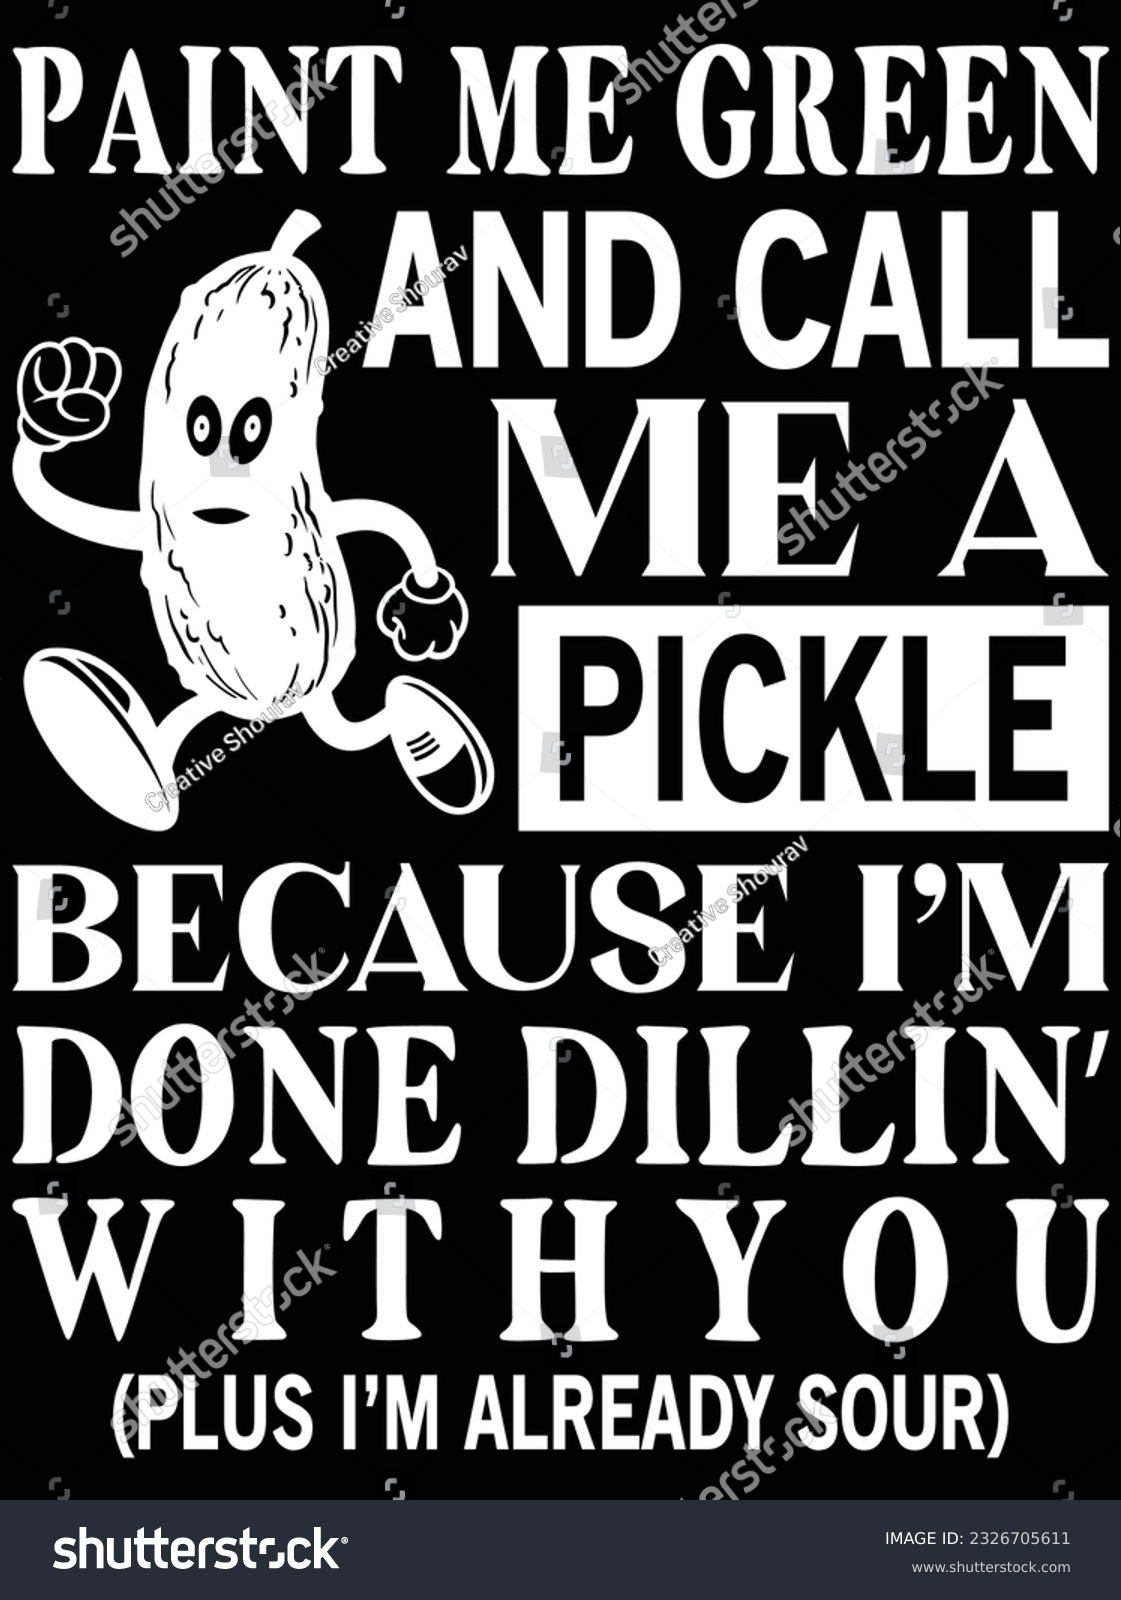 SVG of Paint me green and call me a pickle because I'm done dillin' with you vector art design, eps file. design file for t-shirt. SVG, EPS cuttable design file svg